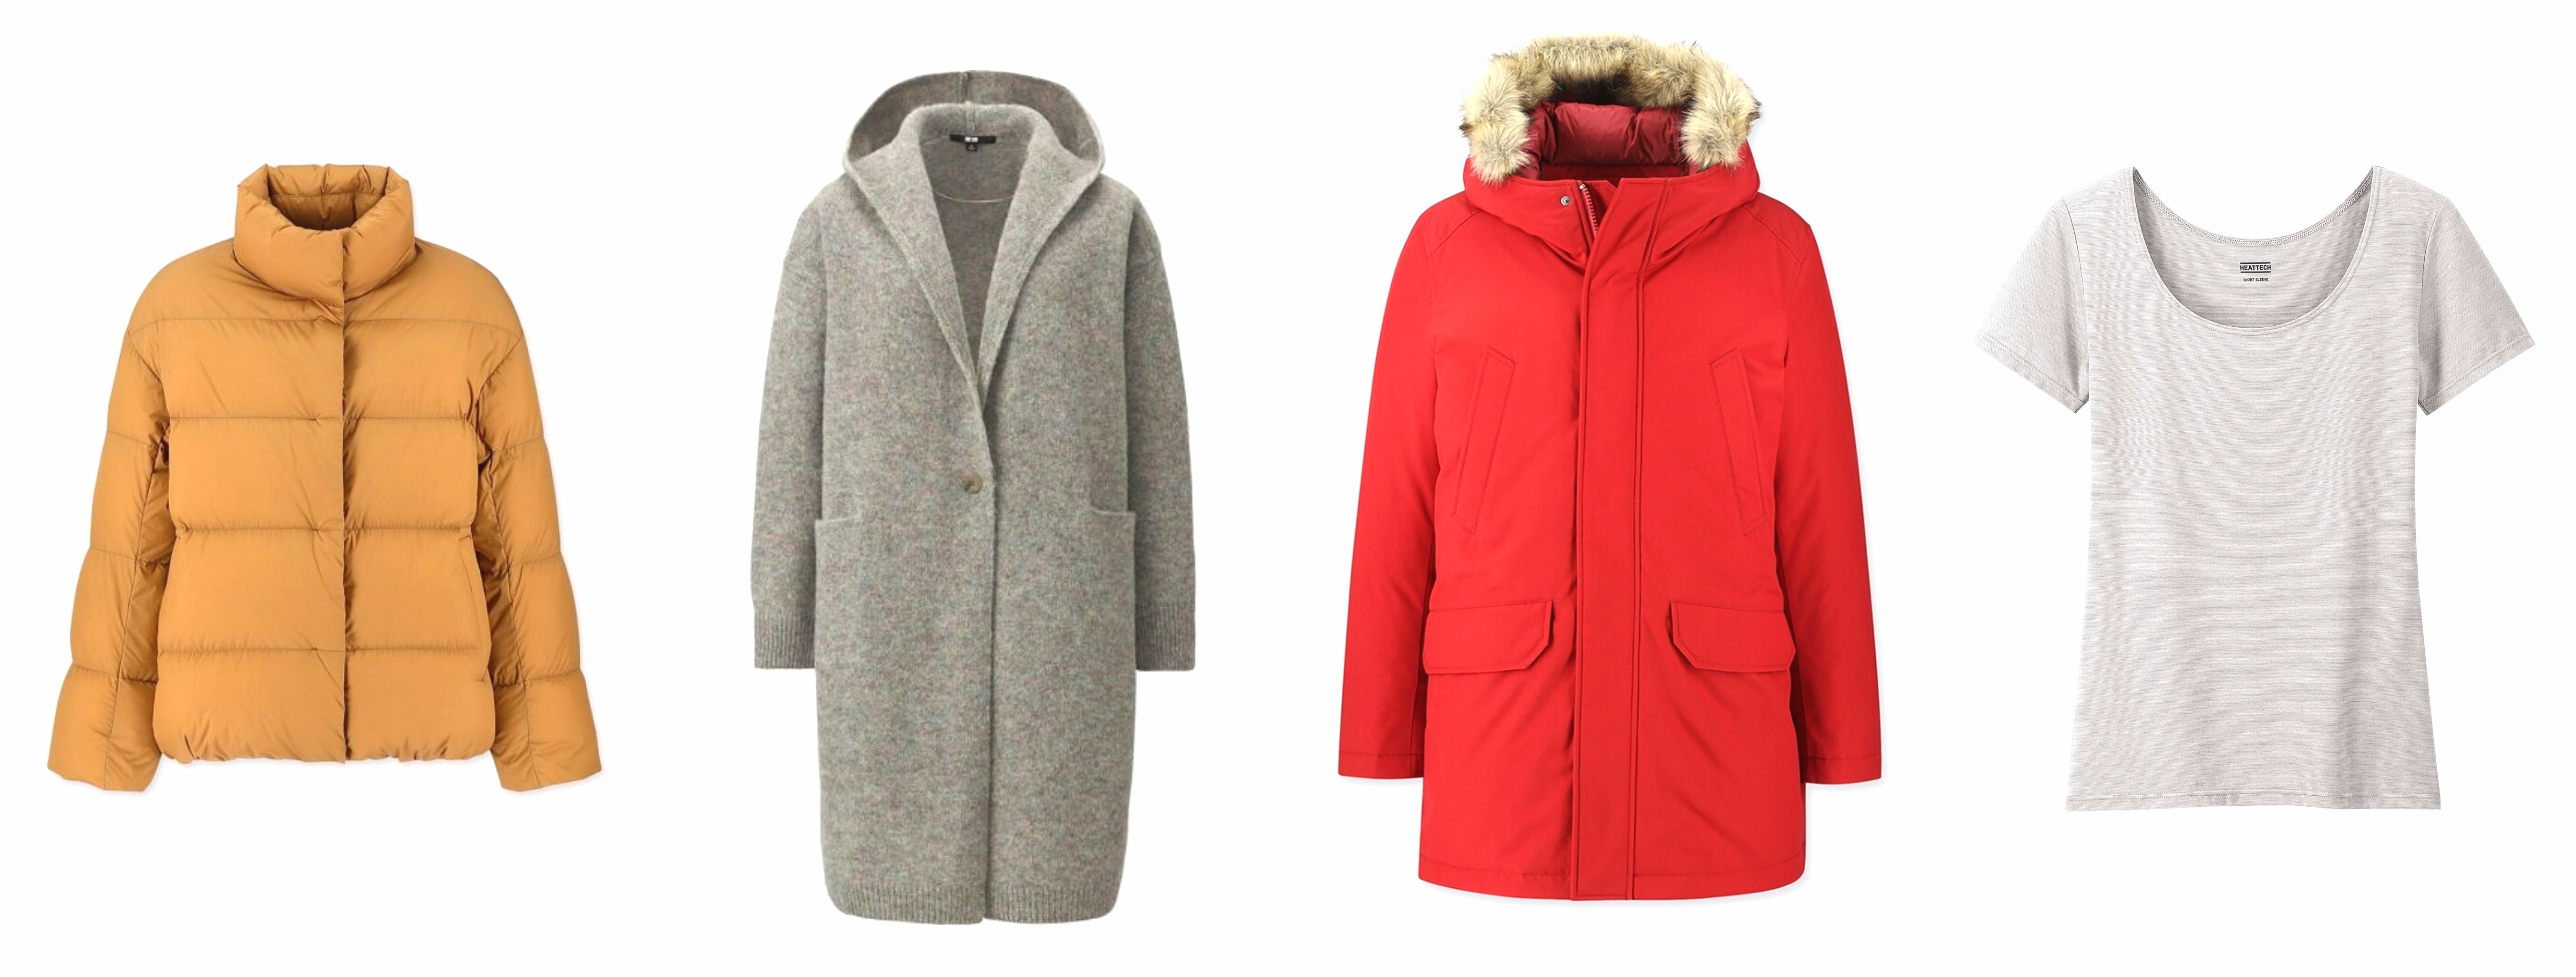 Wardrobe Essentials You Need For Any Type of Cold UNIQLO 2019 Fall